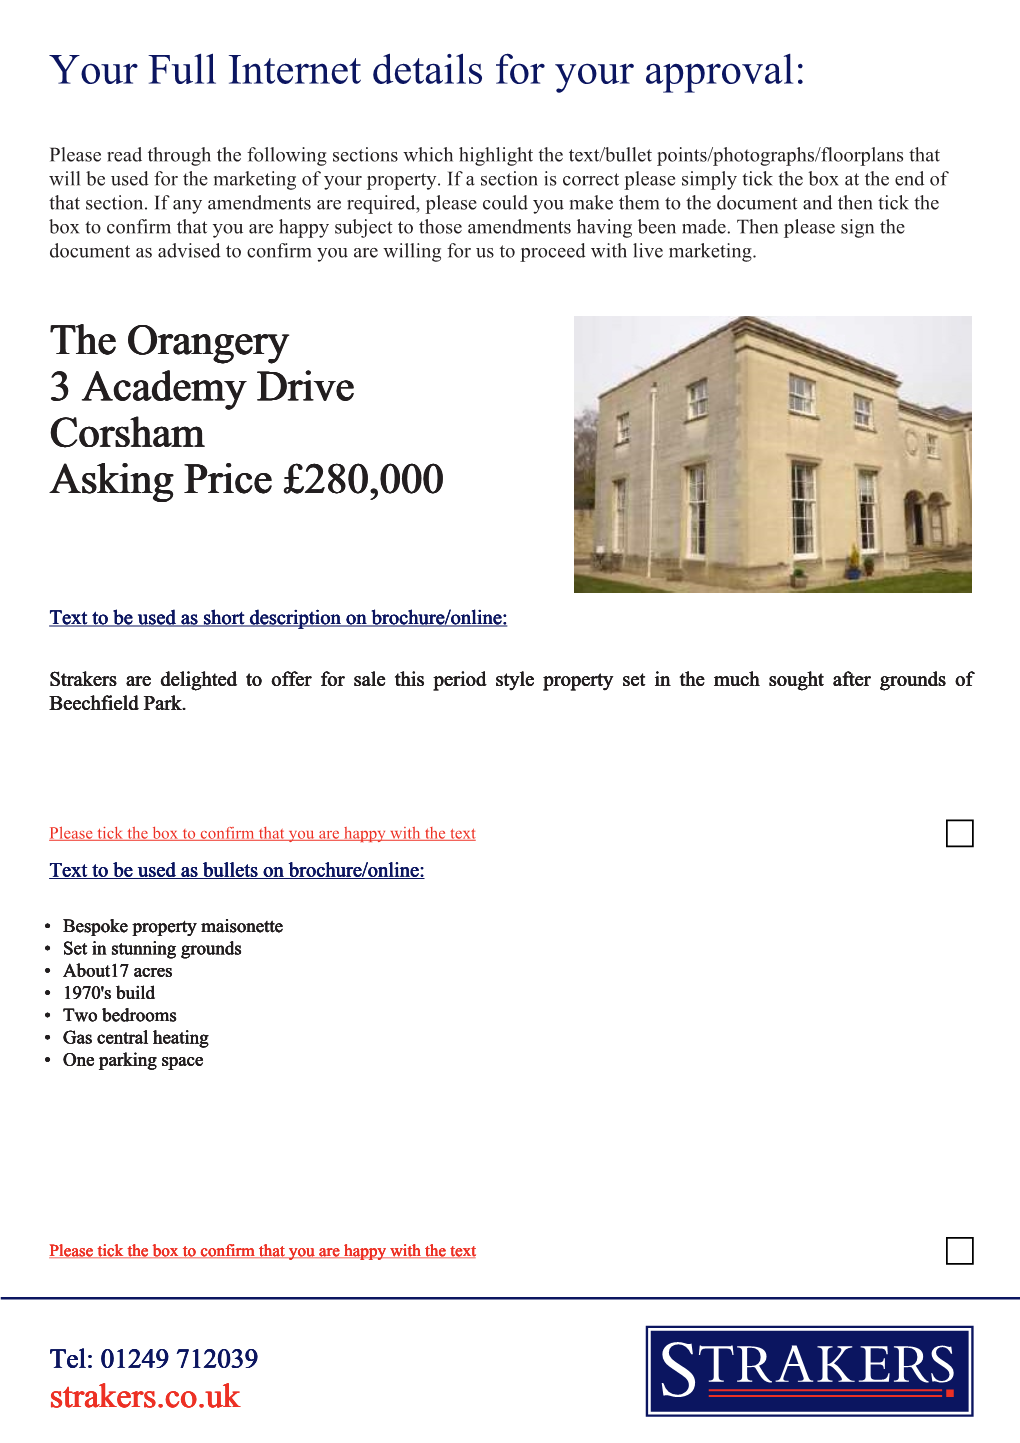 The Orangery 3 Academy Drive Corsham Asking Price £280,000 Your Full Internet Details for Your Approval